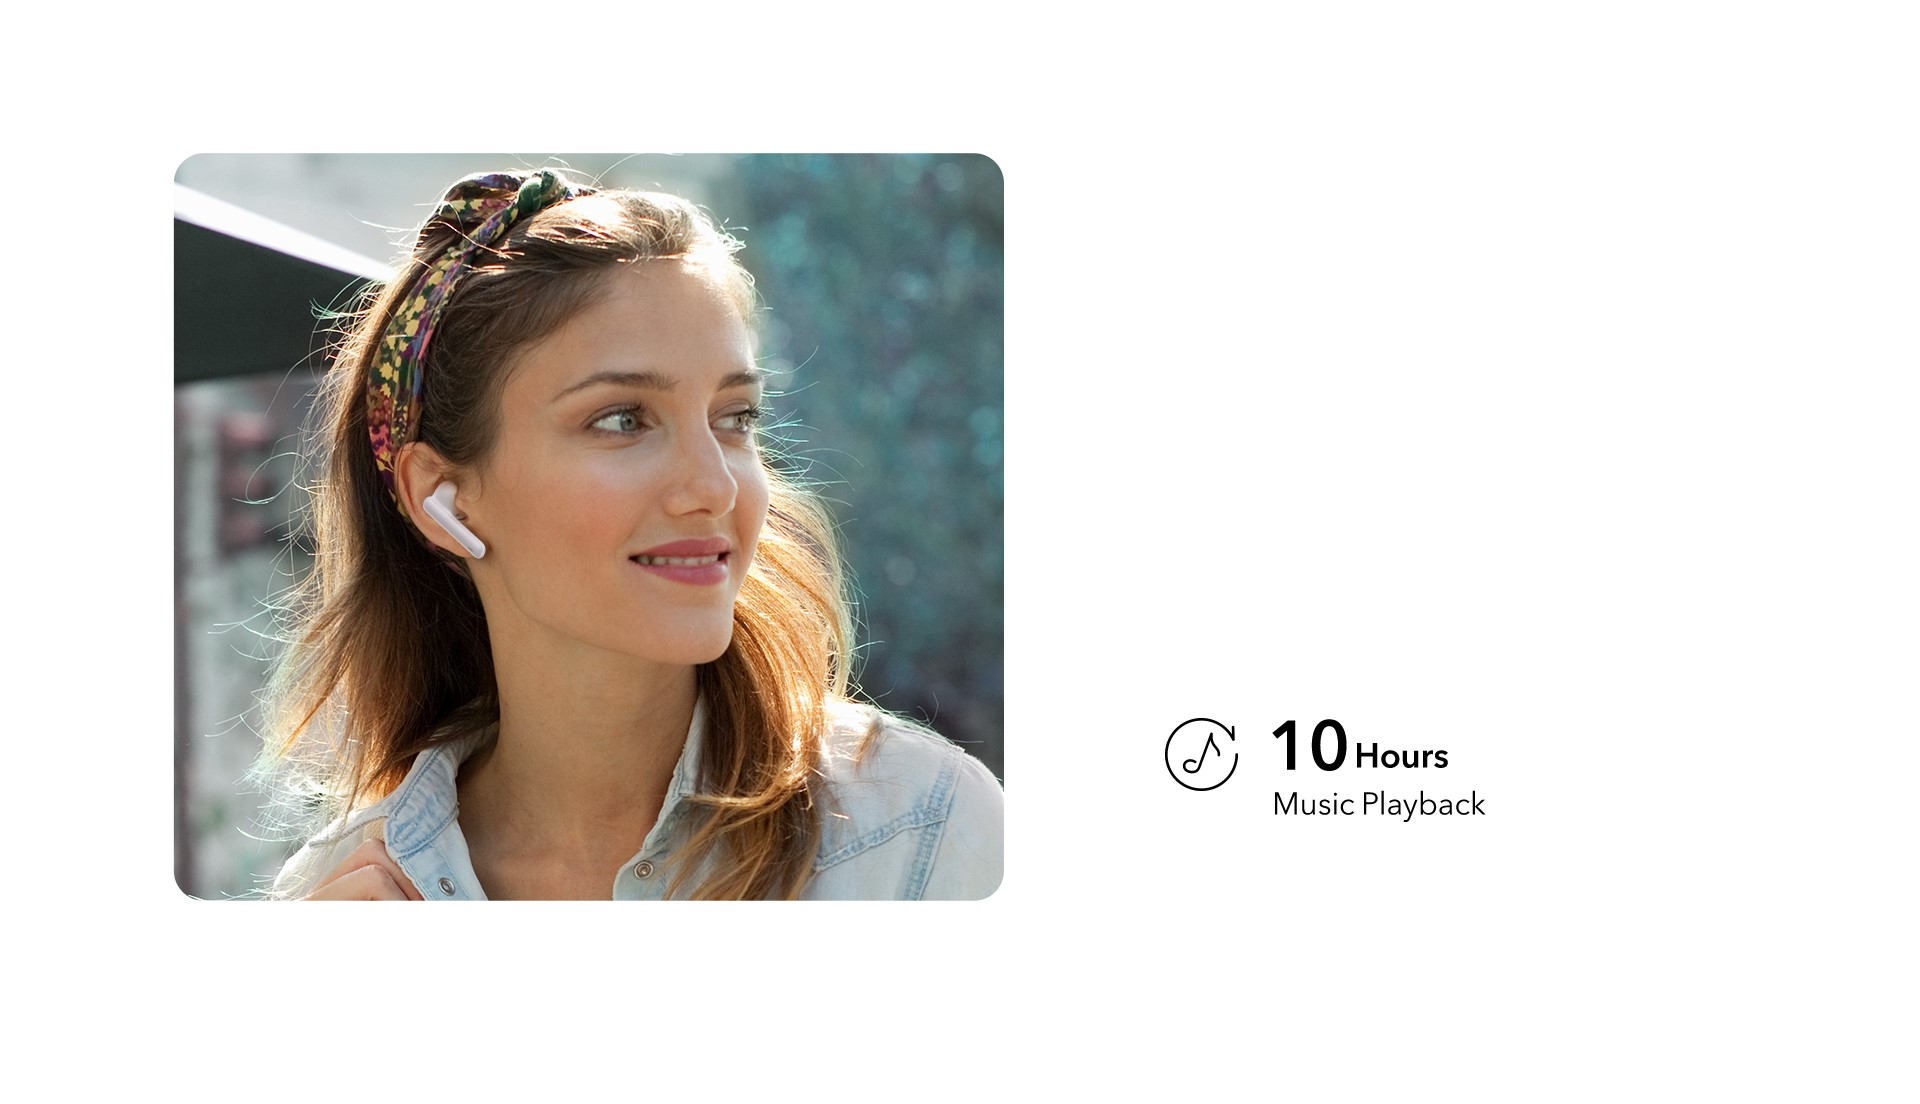 HONOR Earbuds 2 Lite: Listen to music for up to 10 hours on a single charge